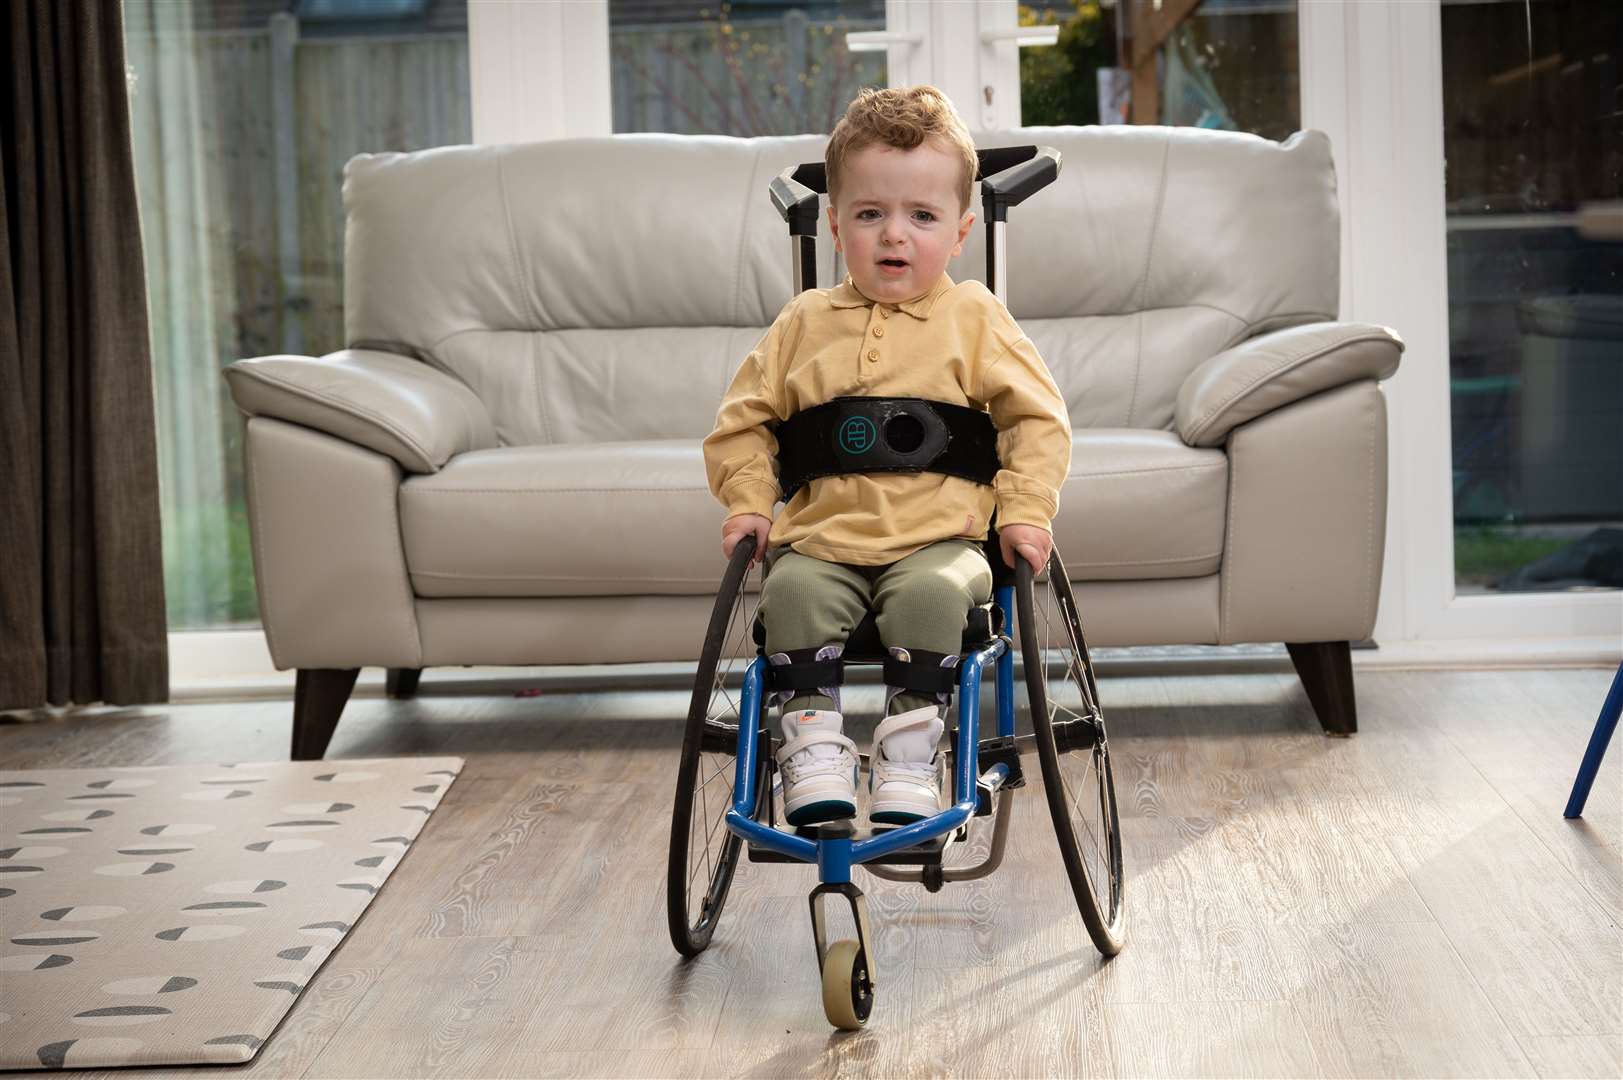 Sidney needs a a specially adapted wheelchair to get about